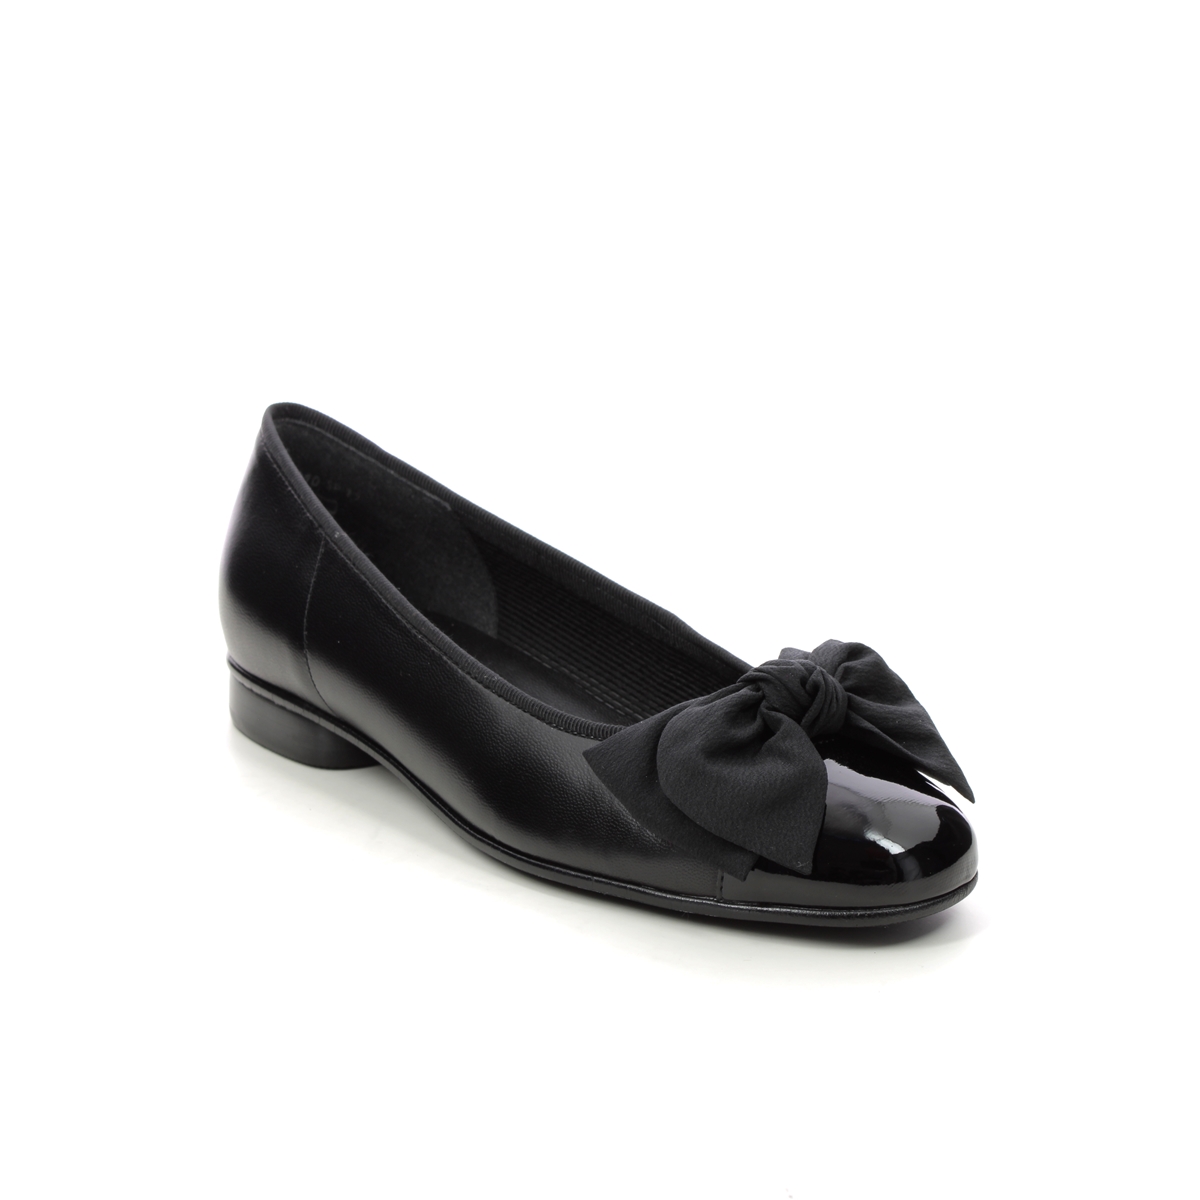 Gabor Amy Black leather Womens pumps 05.106.37 in a Plain Leather and Man-made in Size 7.5